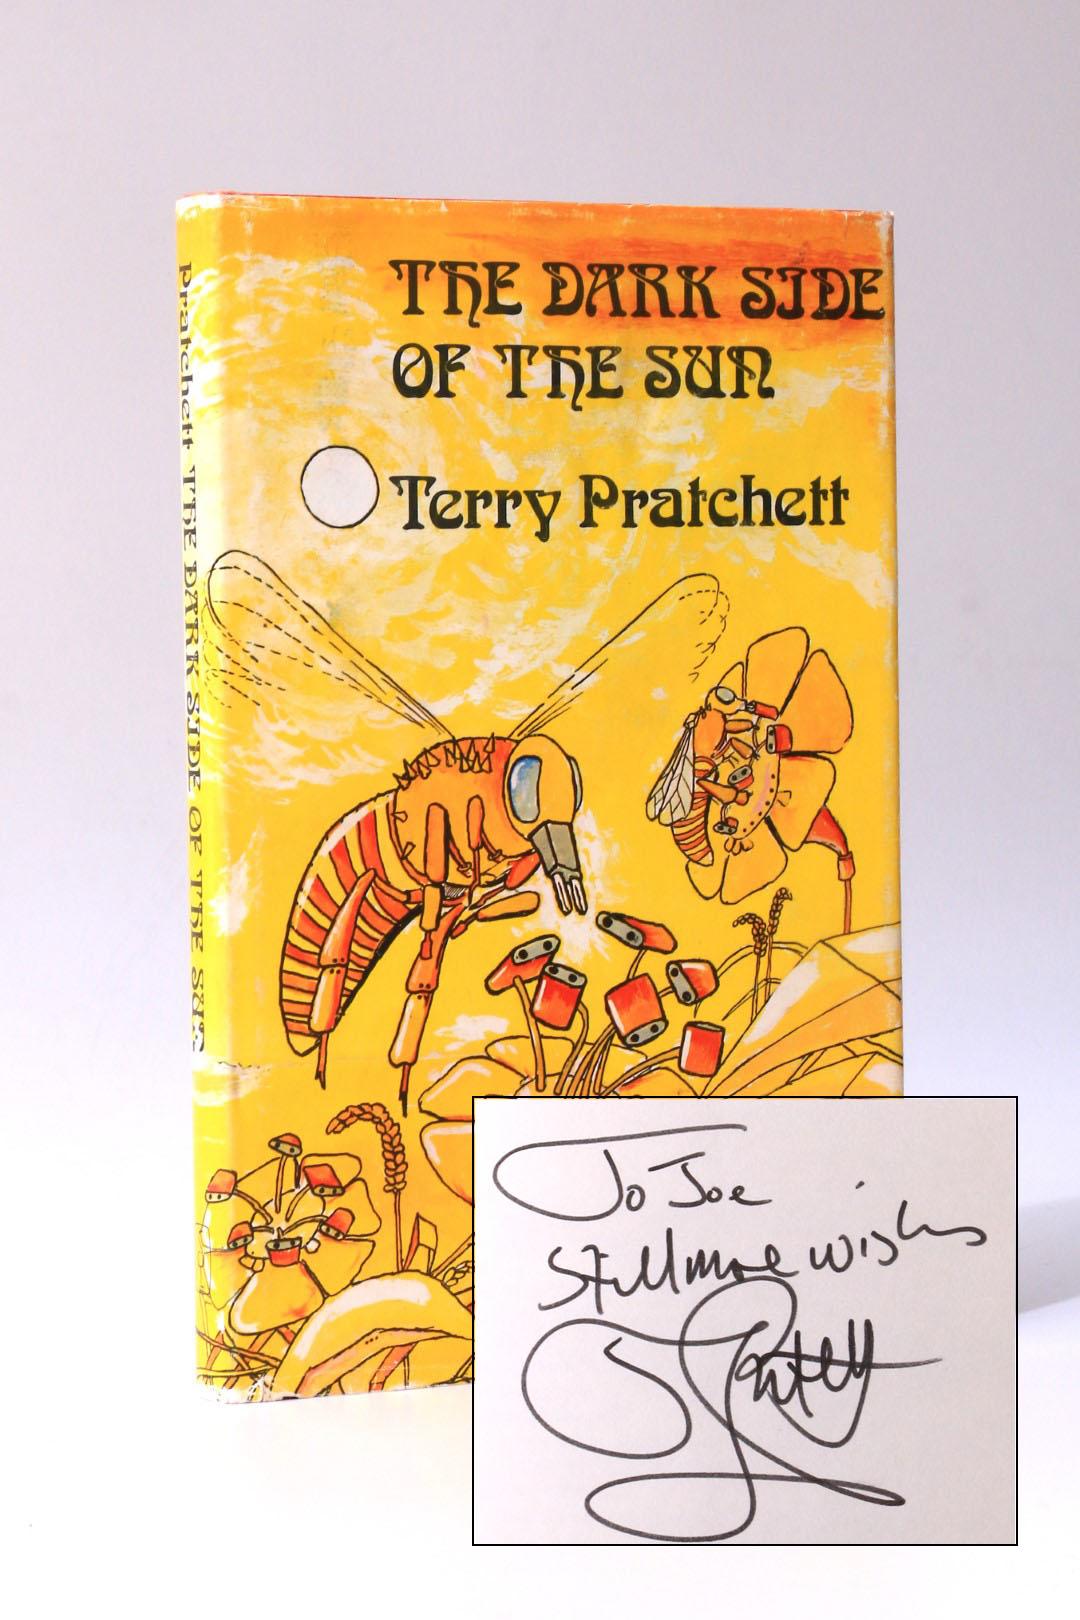 Terry Pratchett - The Dark Side of the Sun - Colin Smythe, 1976, Signed First Edition.